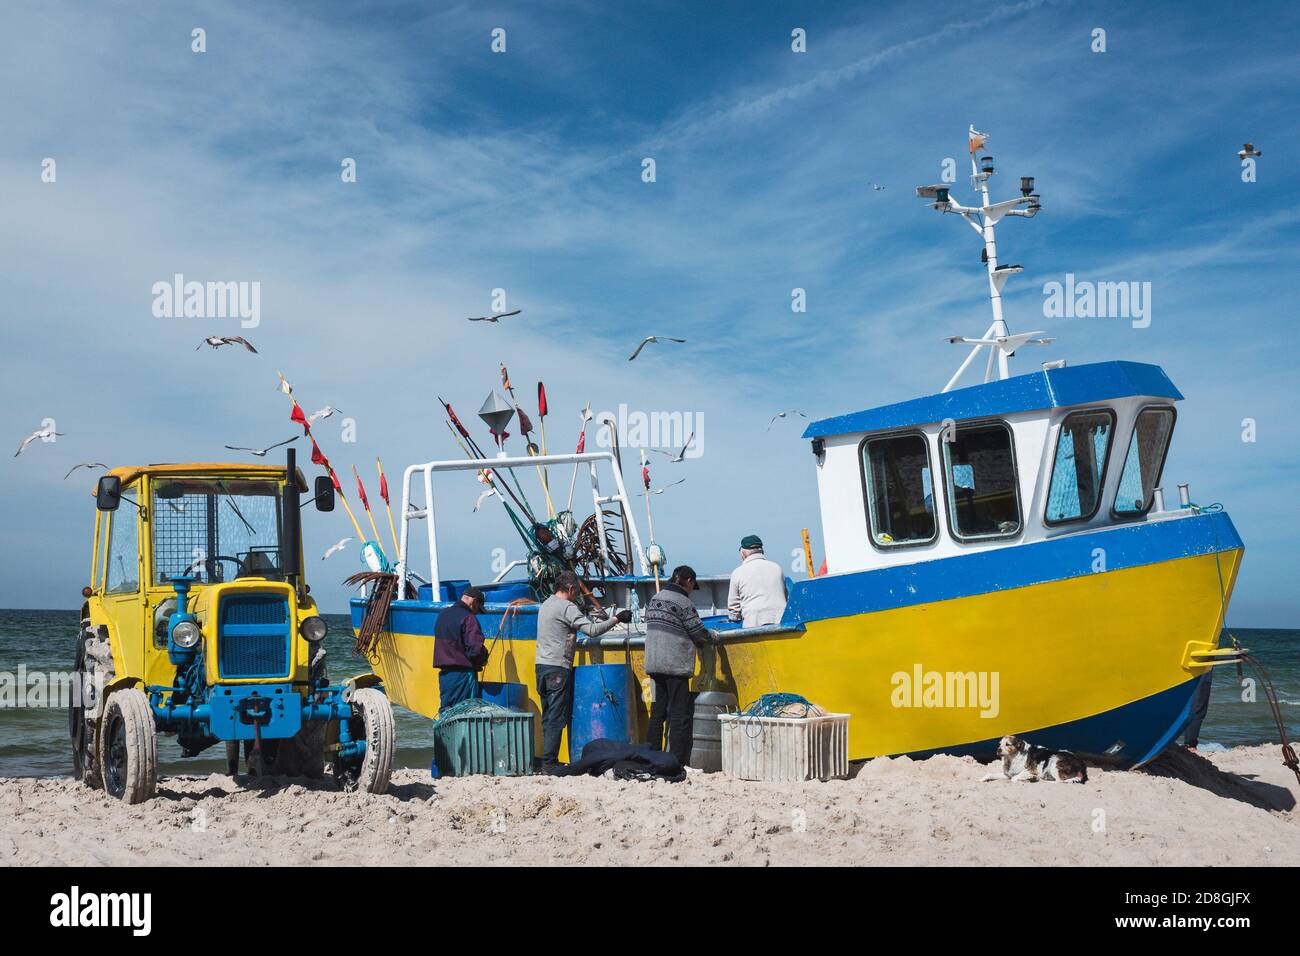 Workers arranging the network next to a fishing boat on the beach. Stock Photo